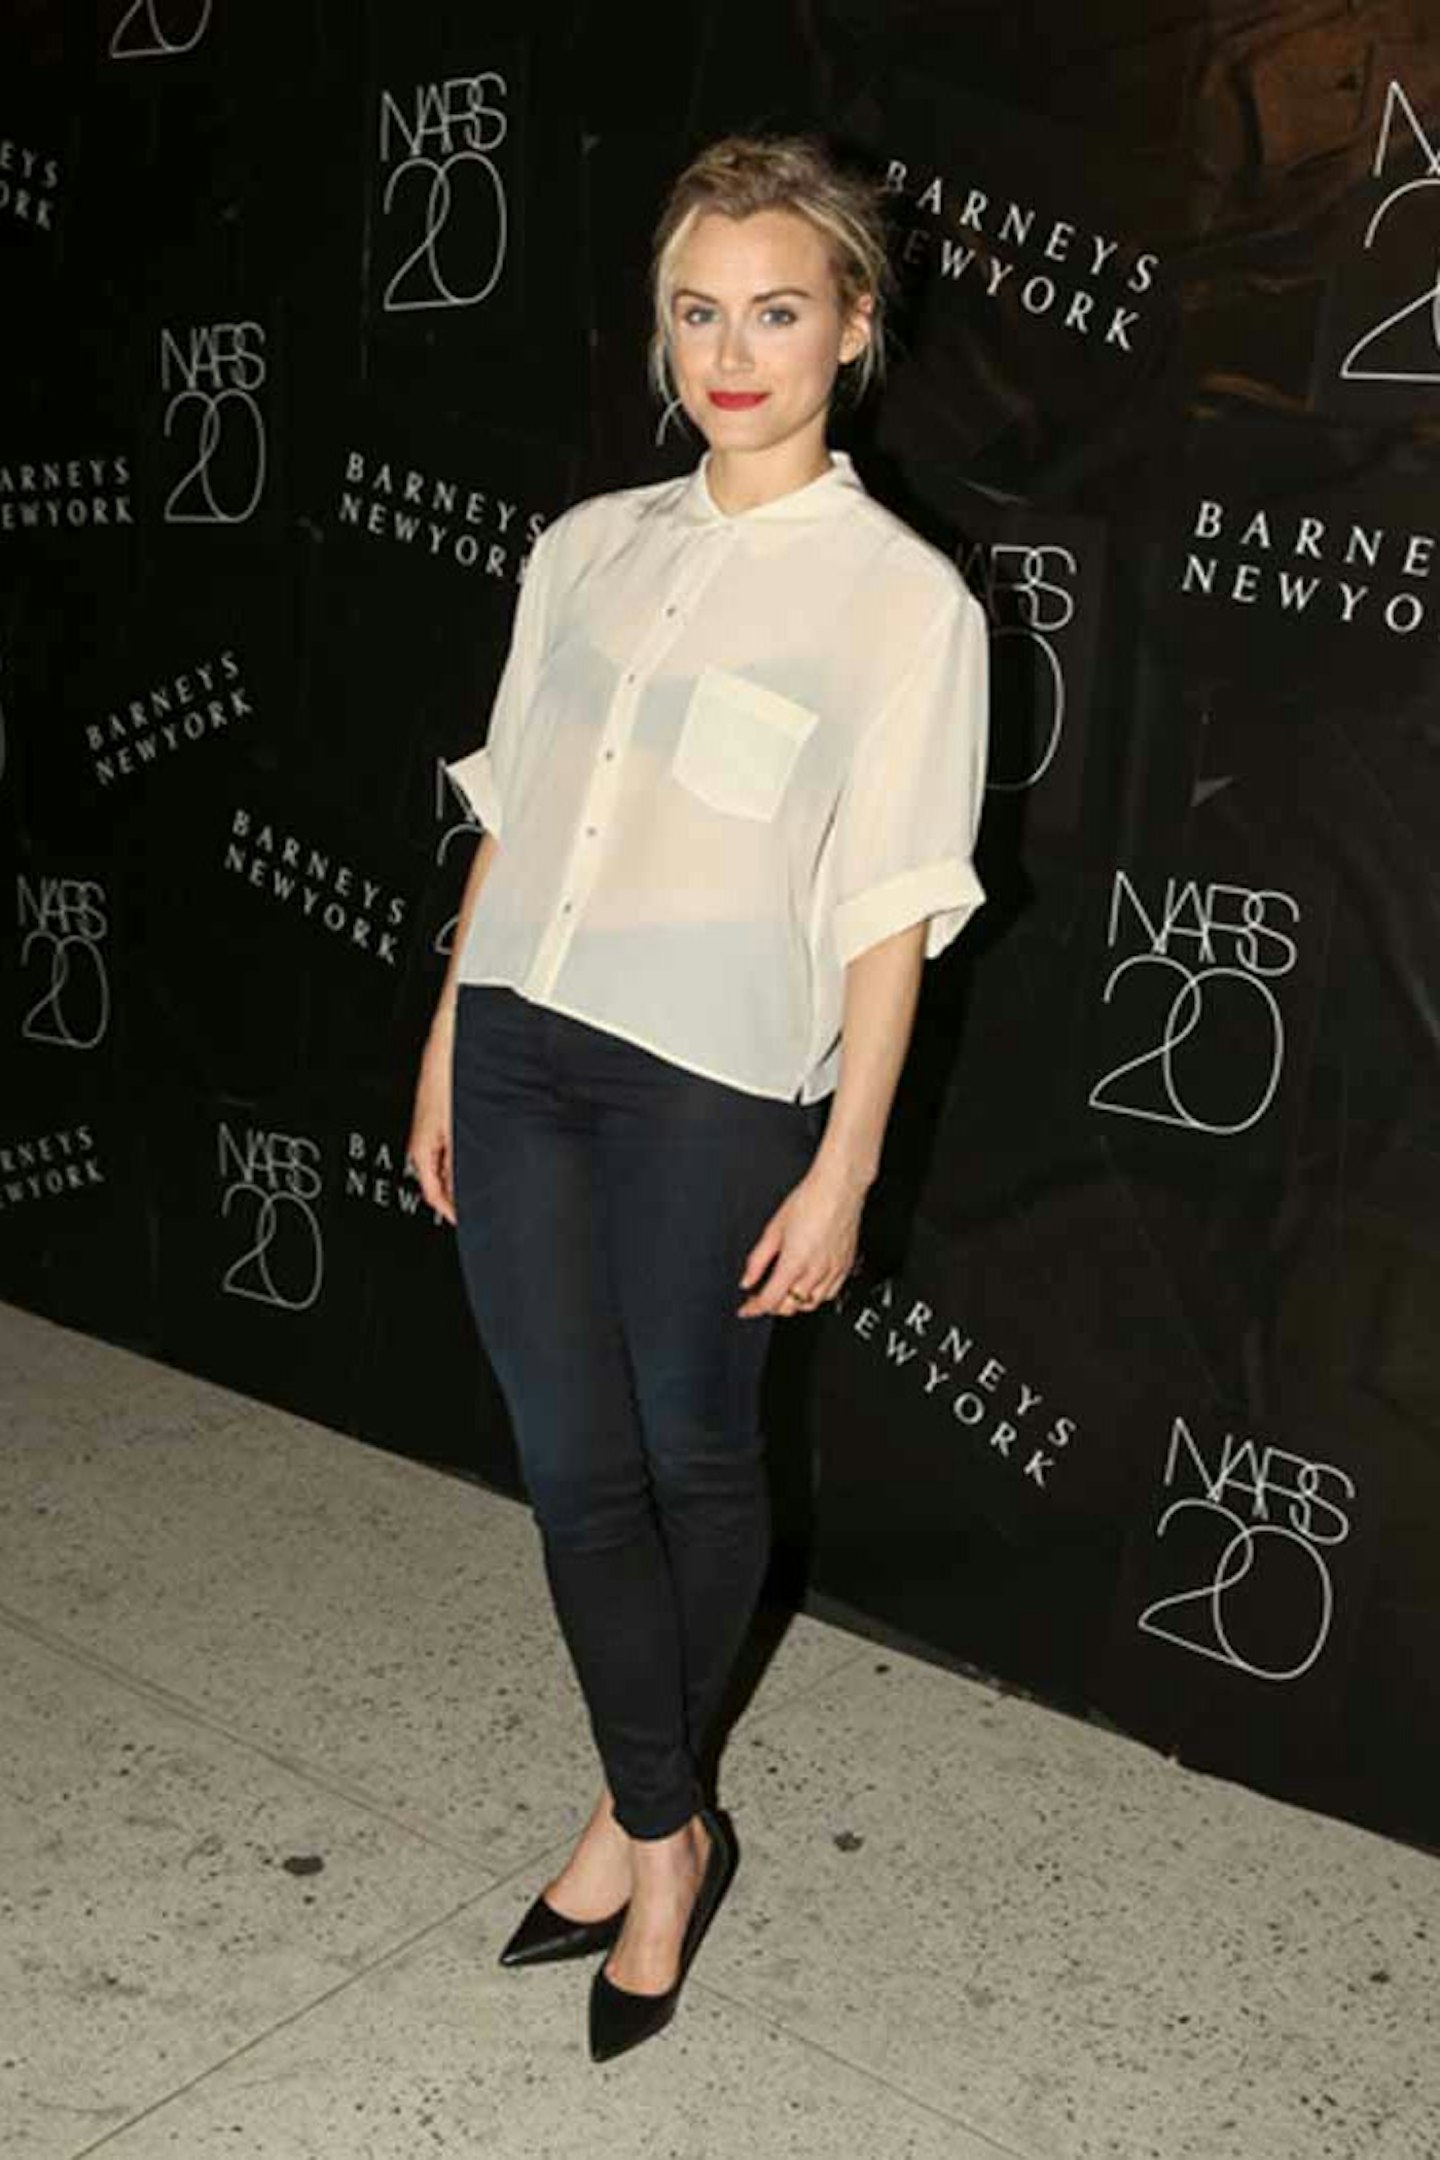 Taylor Schilling at Nars 20th Anniversary celebration, Maccarone Gallery, New York - 4 September 2014